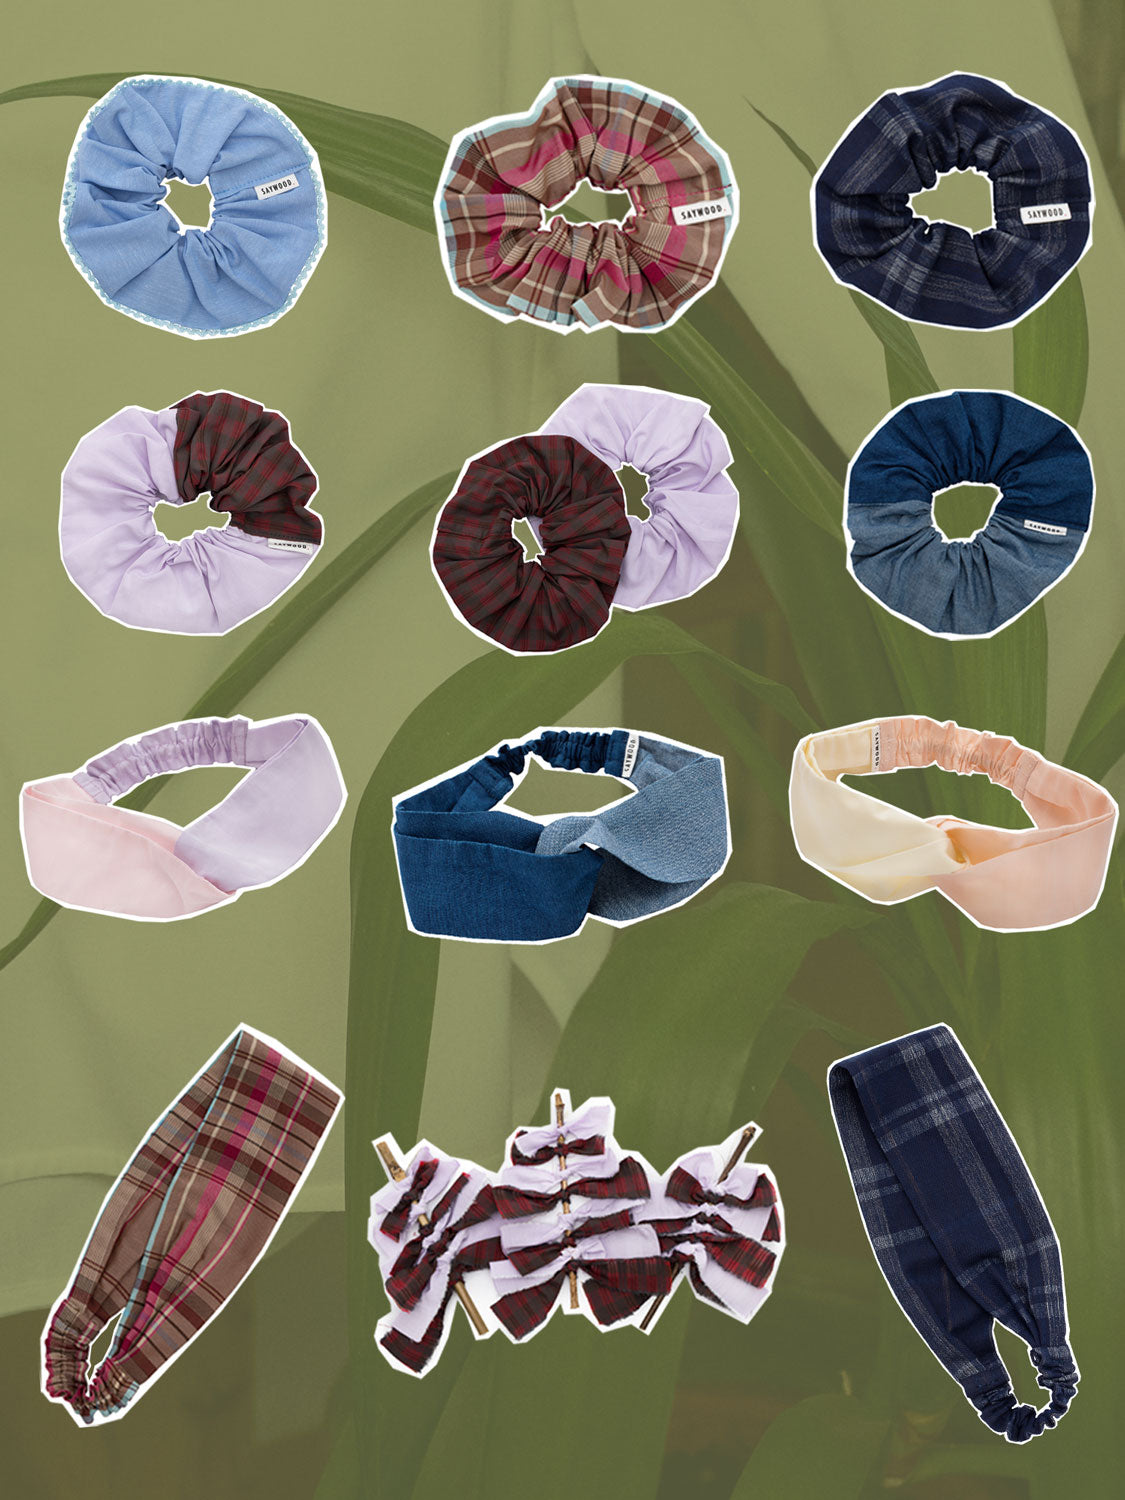 Saywood's sustainable hair scrunchies and headbands, with Christmas tree decorations. Images cut out on a background of a close up of white shirt and green plants